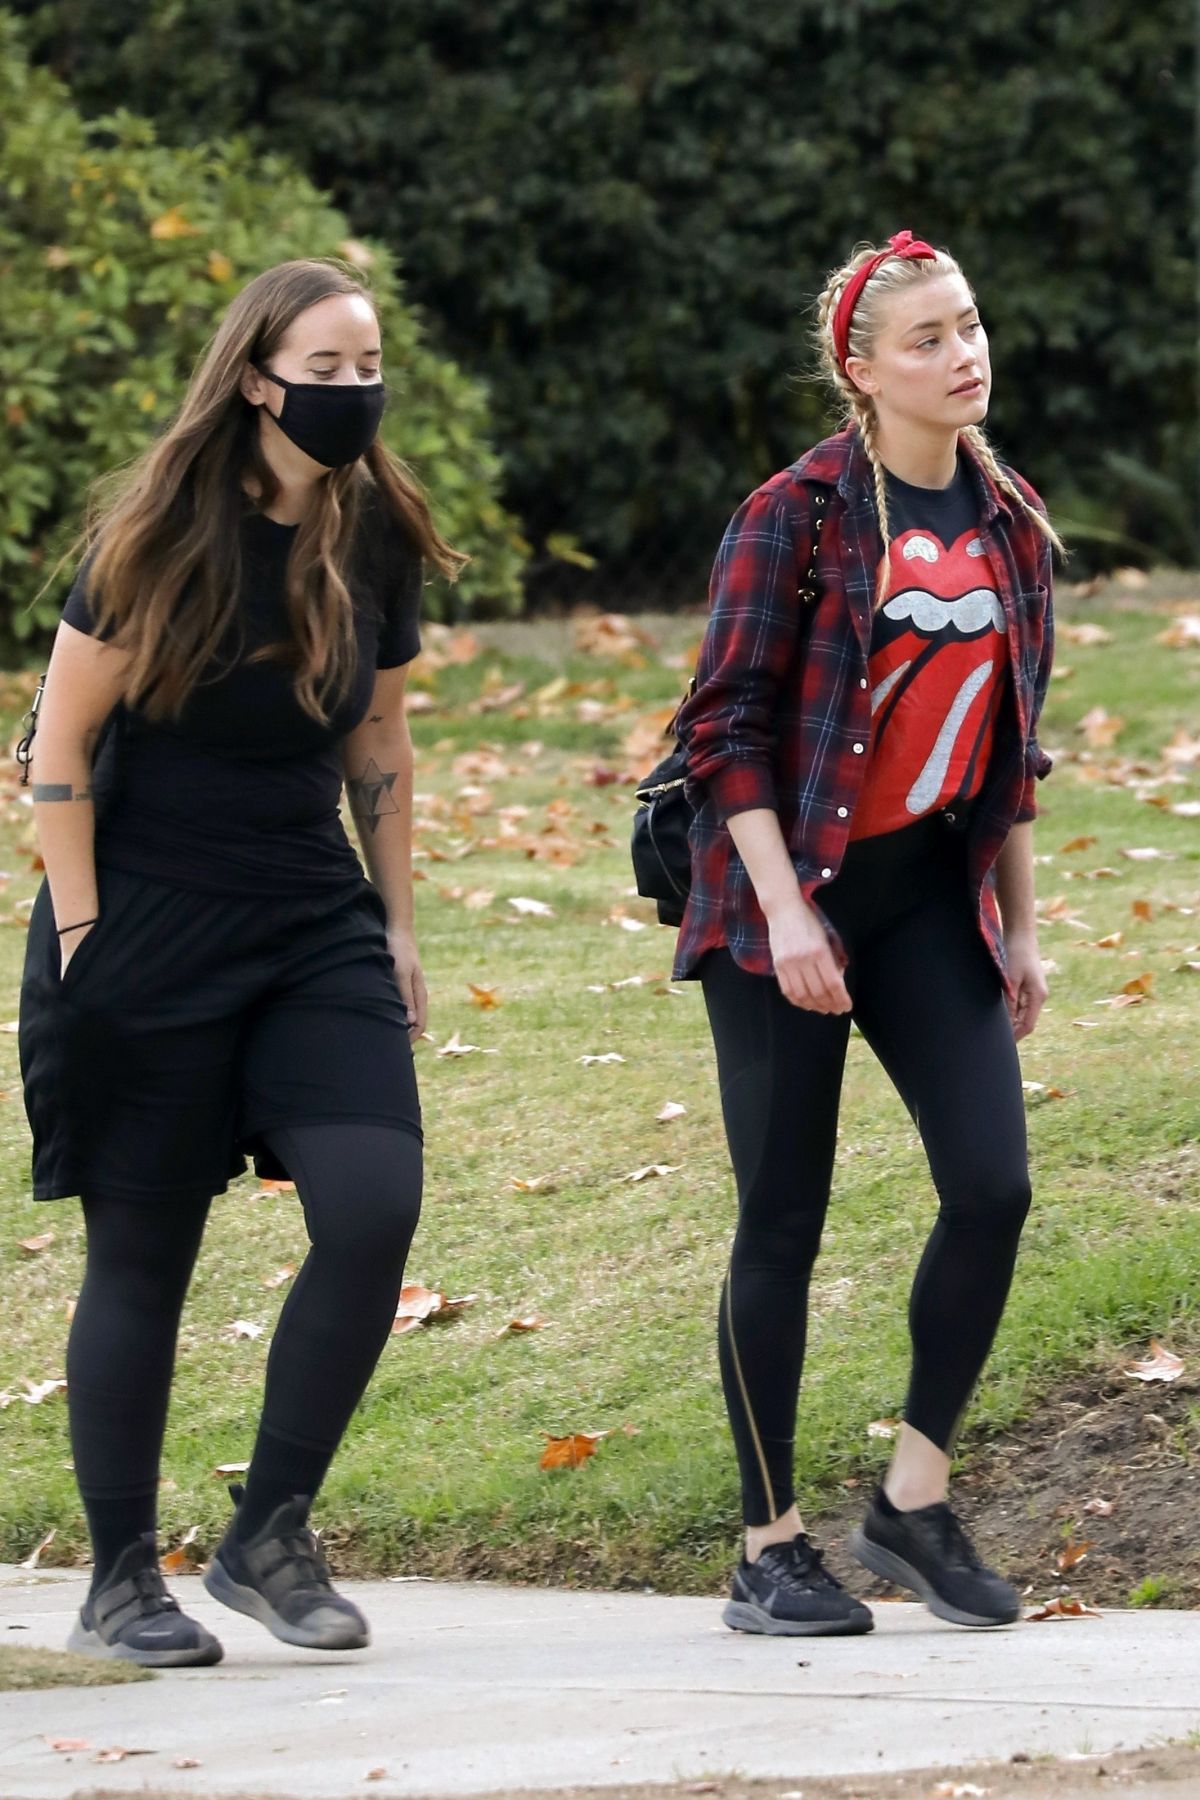 amber-heard-out-hiking-in-los-angeles-11-18-2020-0.jpg